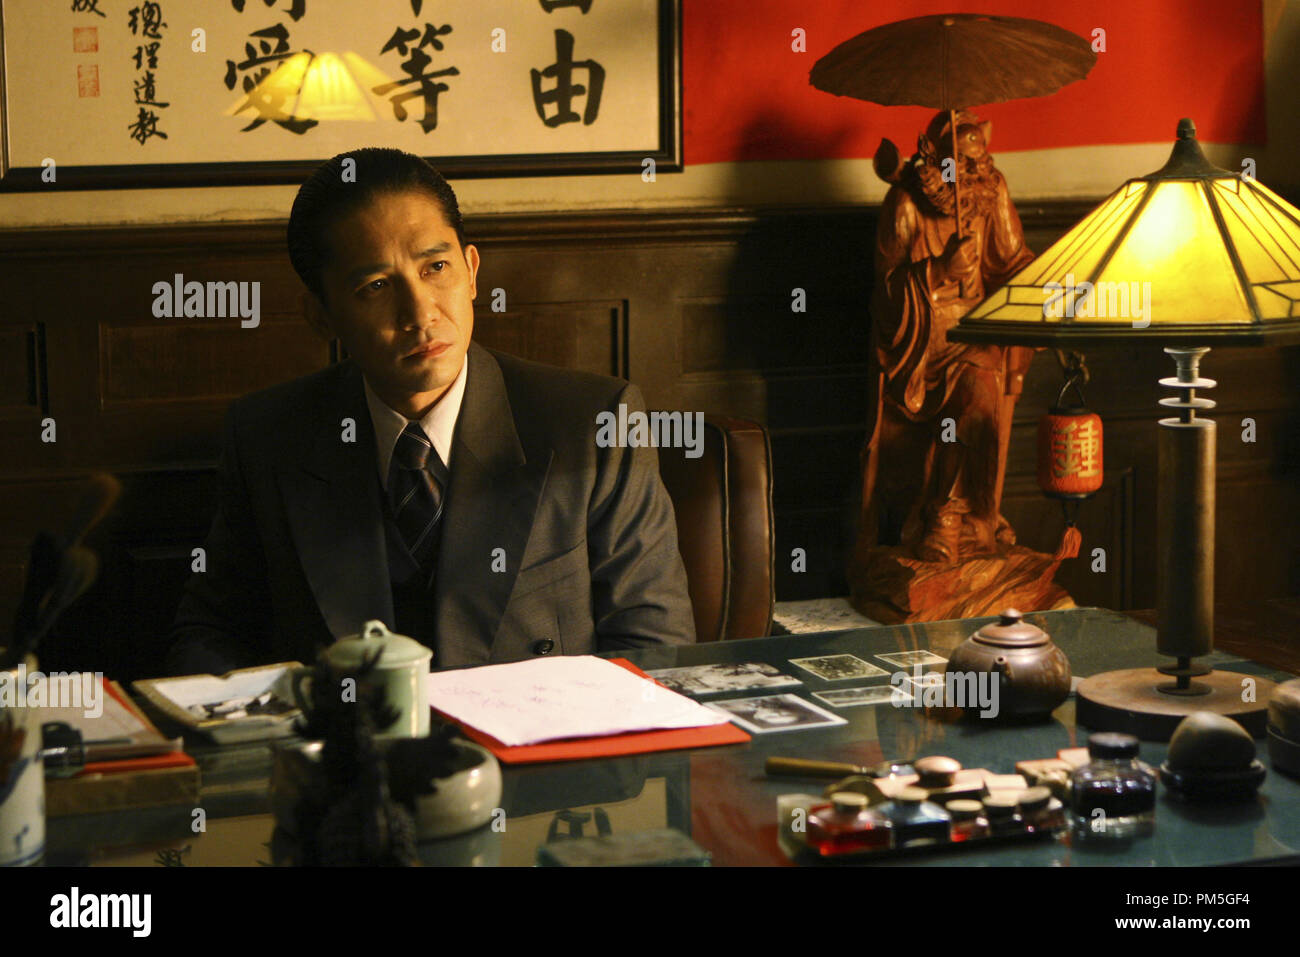 Film Still from 'Lust, Caution' (aka 'Se, jie') Tony Leung Chiu Wai © 2007 Focus Features Photo credit: Chan Kam Chuen   File Reference # 30738244THA  For Editorial Use Only -  All Rights Reserved Stock Photo